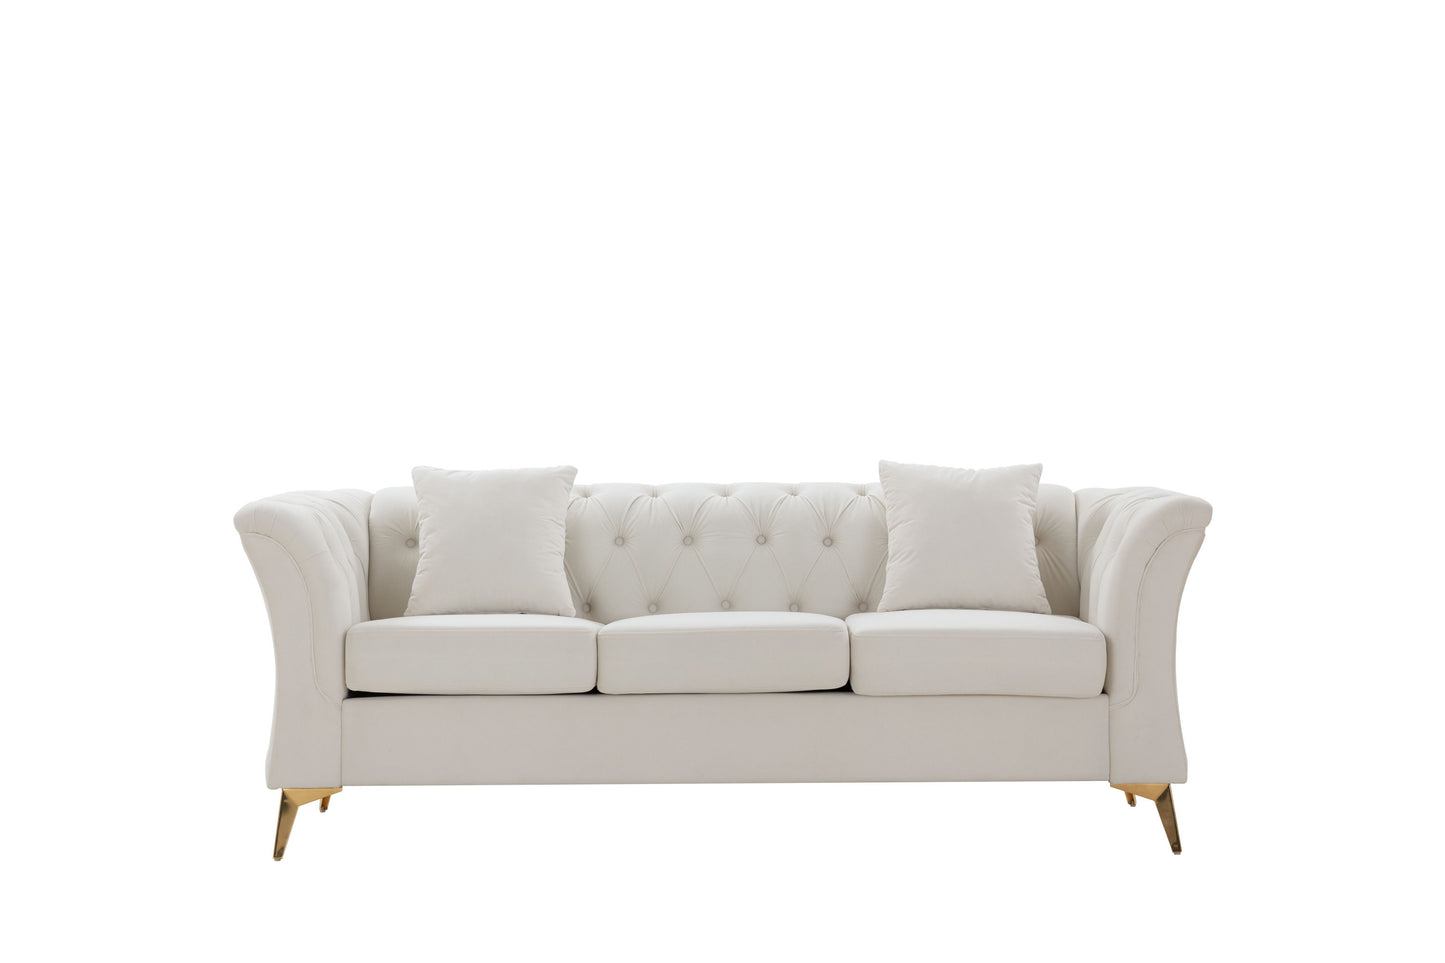 Modern Chesterfield Curved Sofa Tufted Velvet Couch 3 Seat Button Tufed Loveseat with Scroll Arms and Gold Metal Legs for Living Room Bedroom Beige